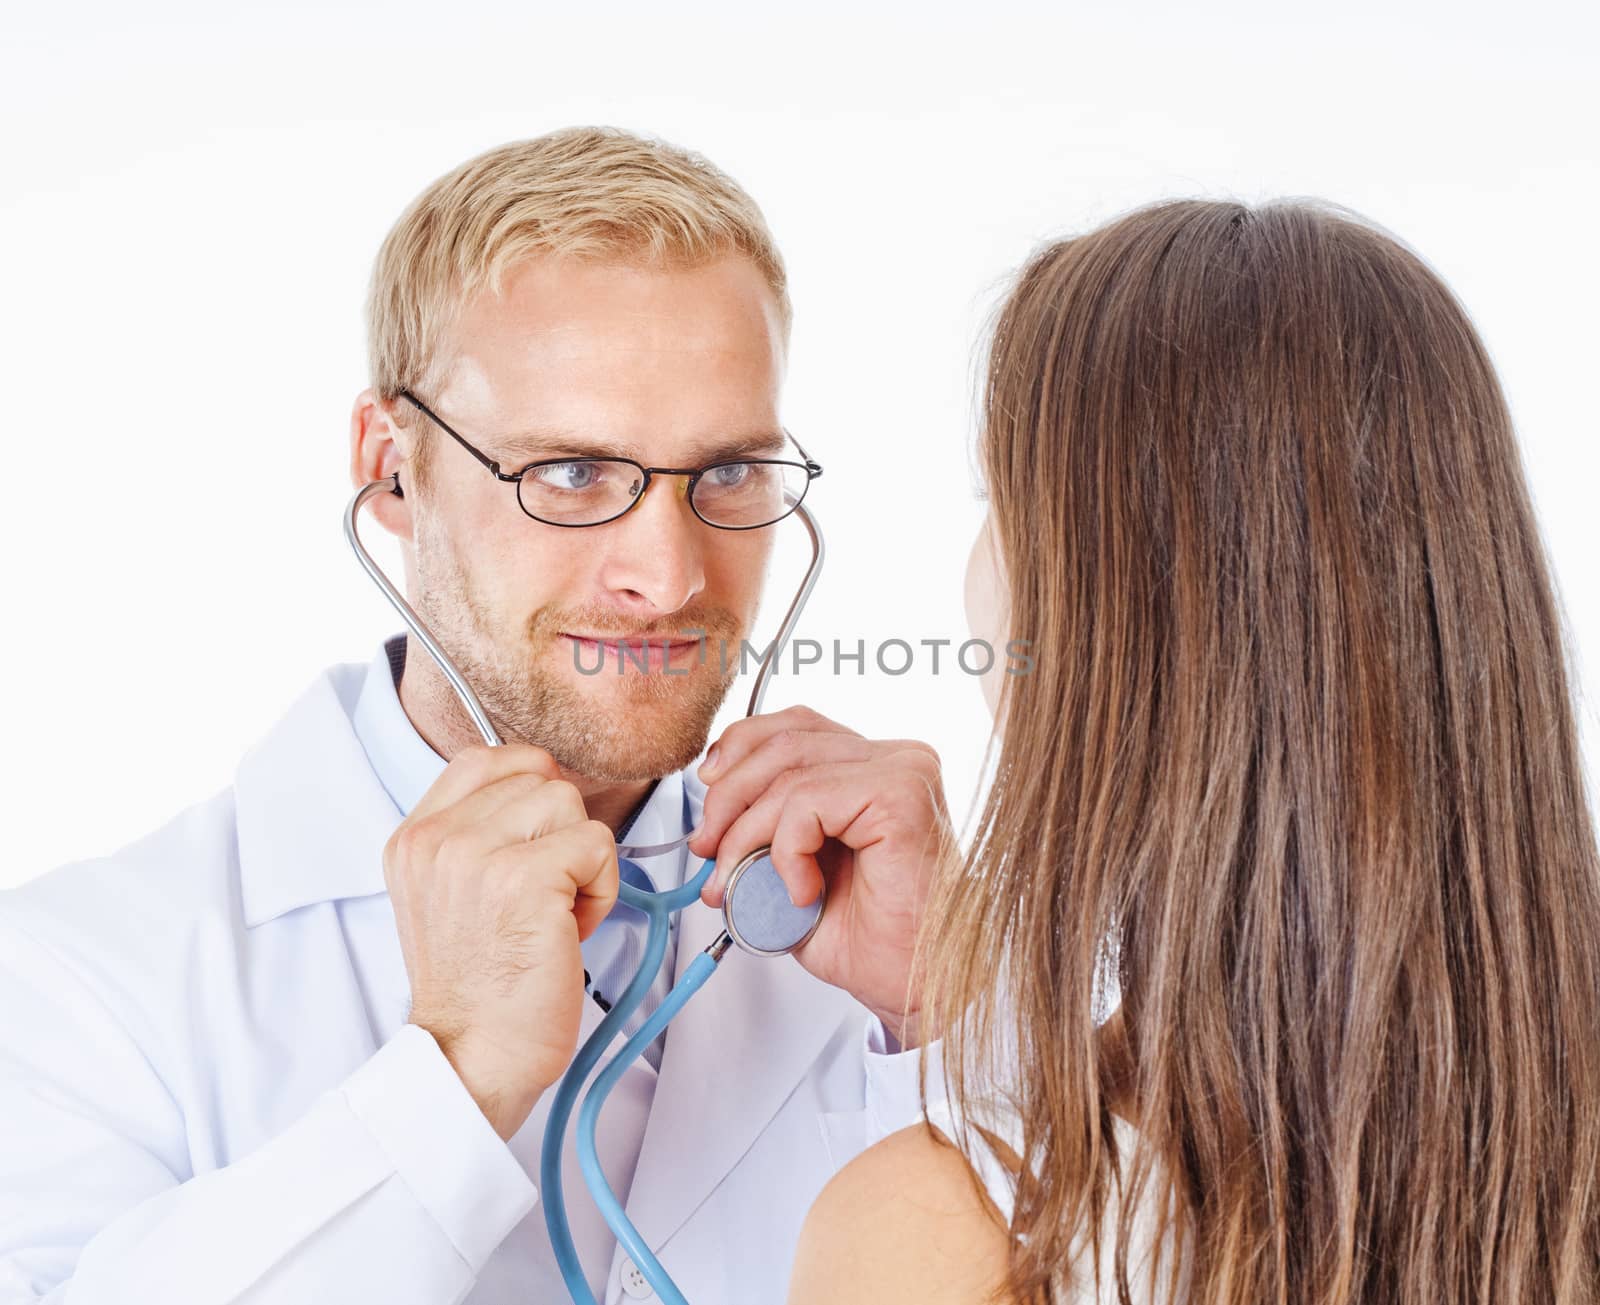 Young Doctor with Stethoscope and Glasses Examining Patient